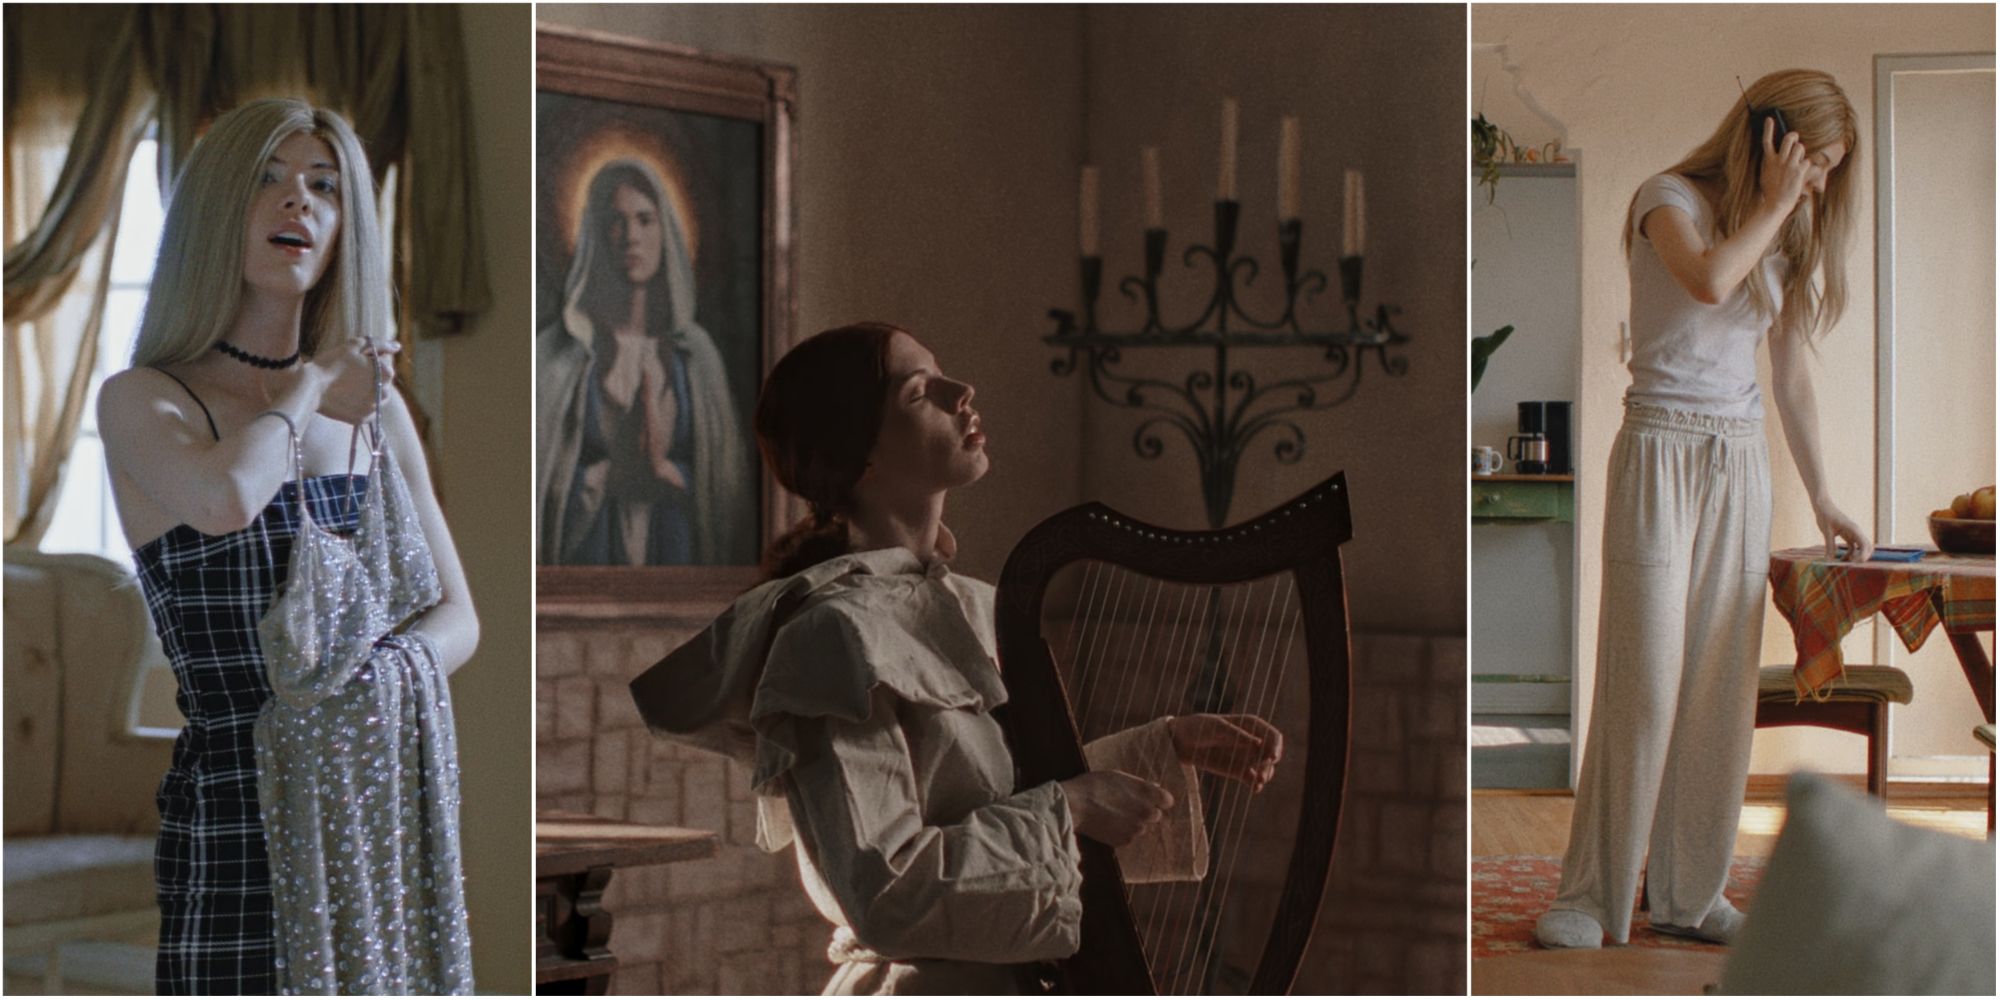 Immortality Marissa Marcel in films triptych left to right, looking at dress, playing harp in monk robes, on phone